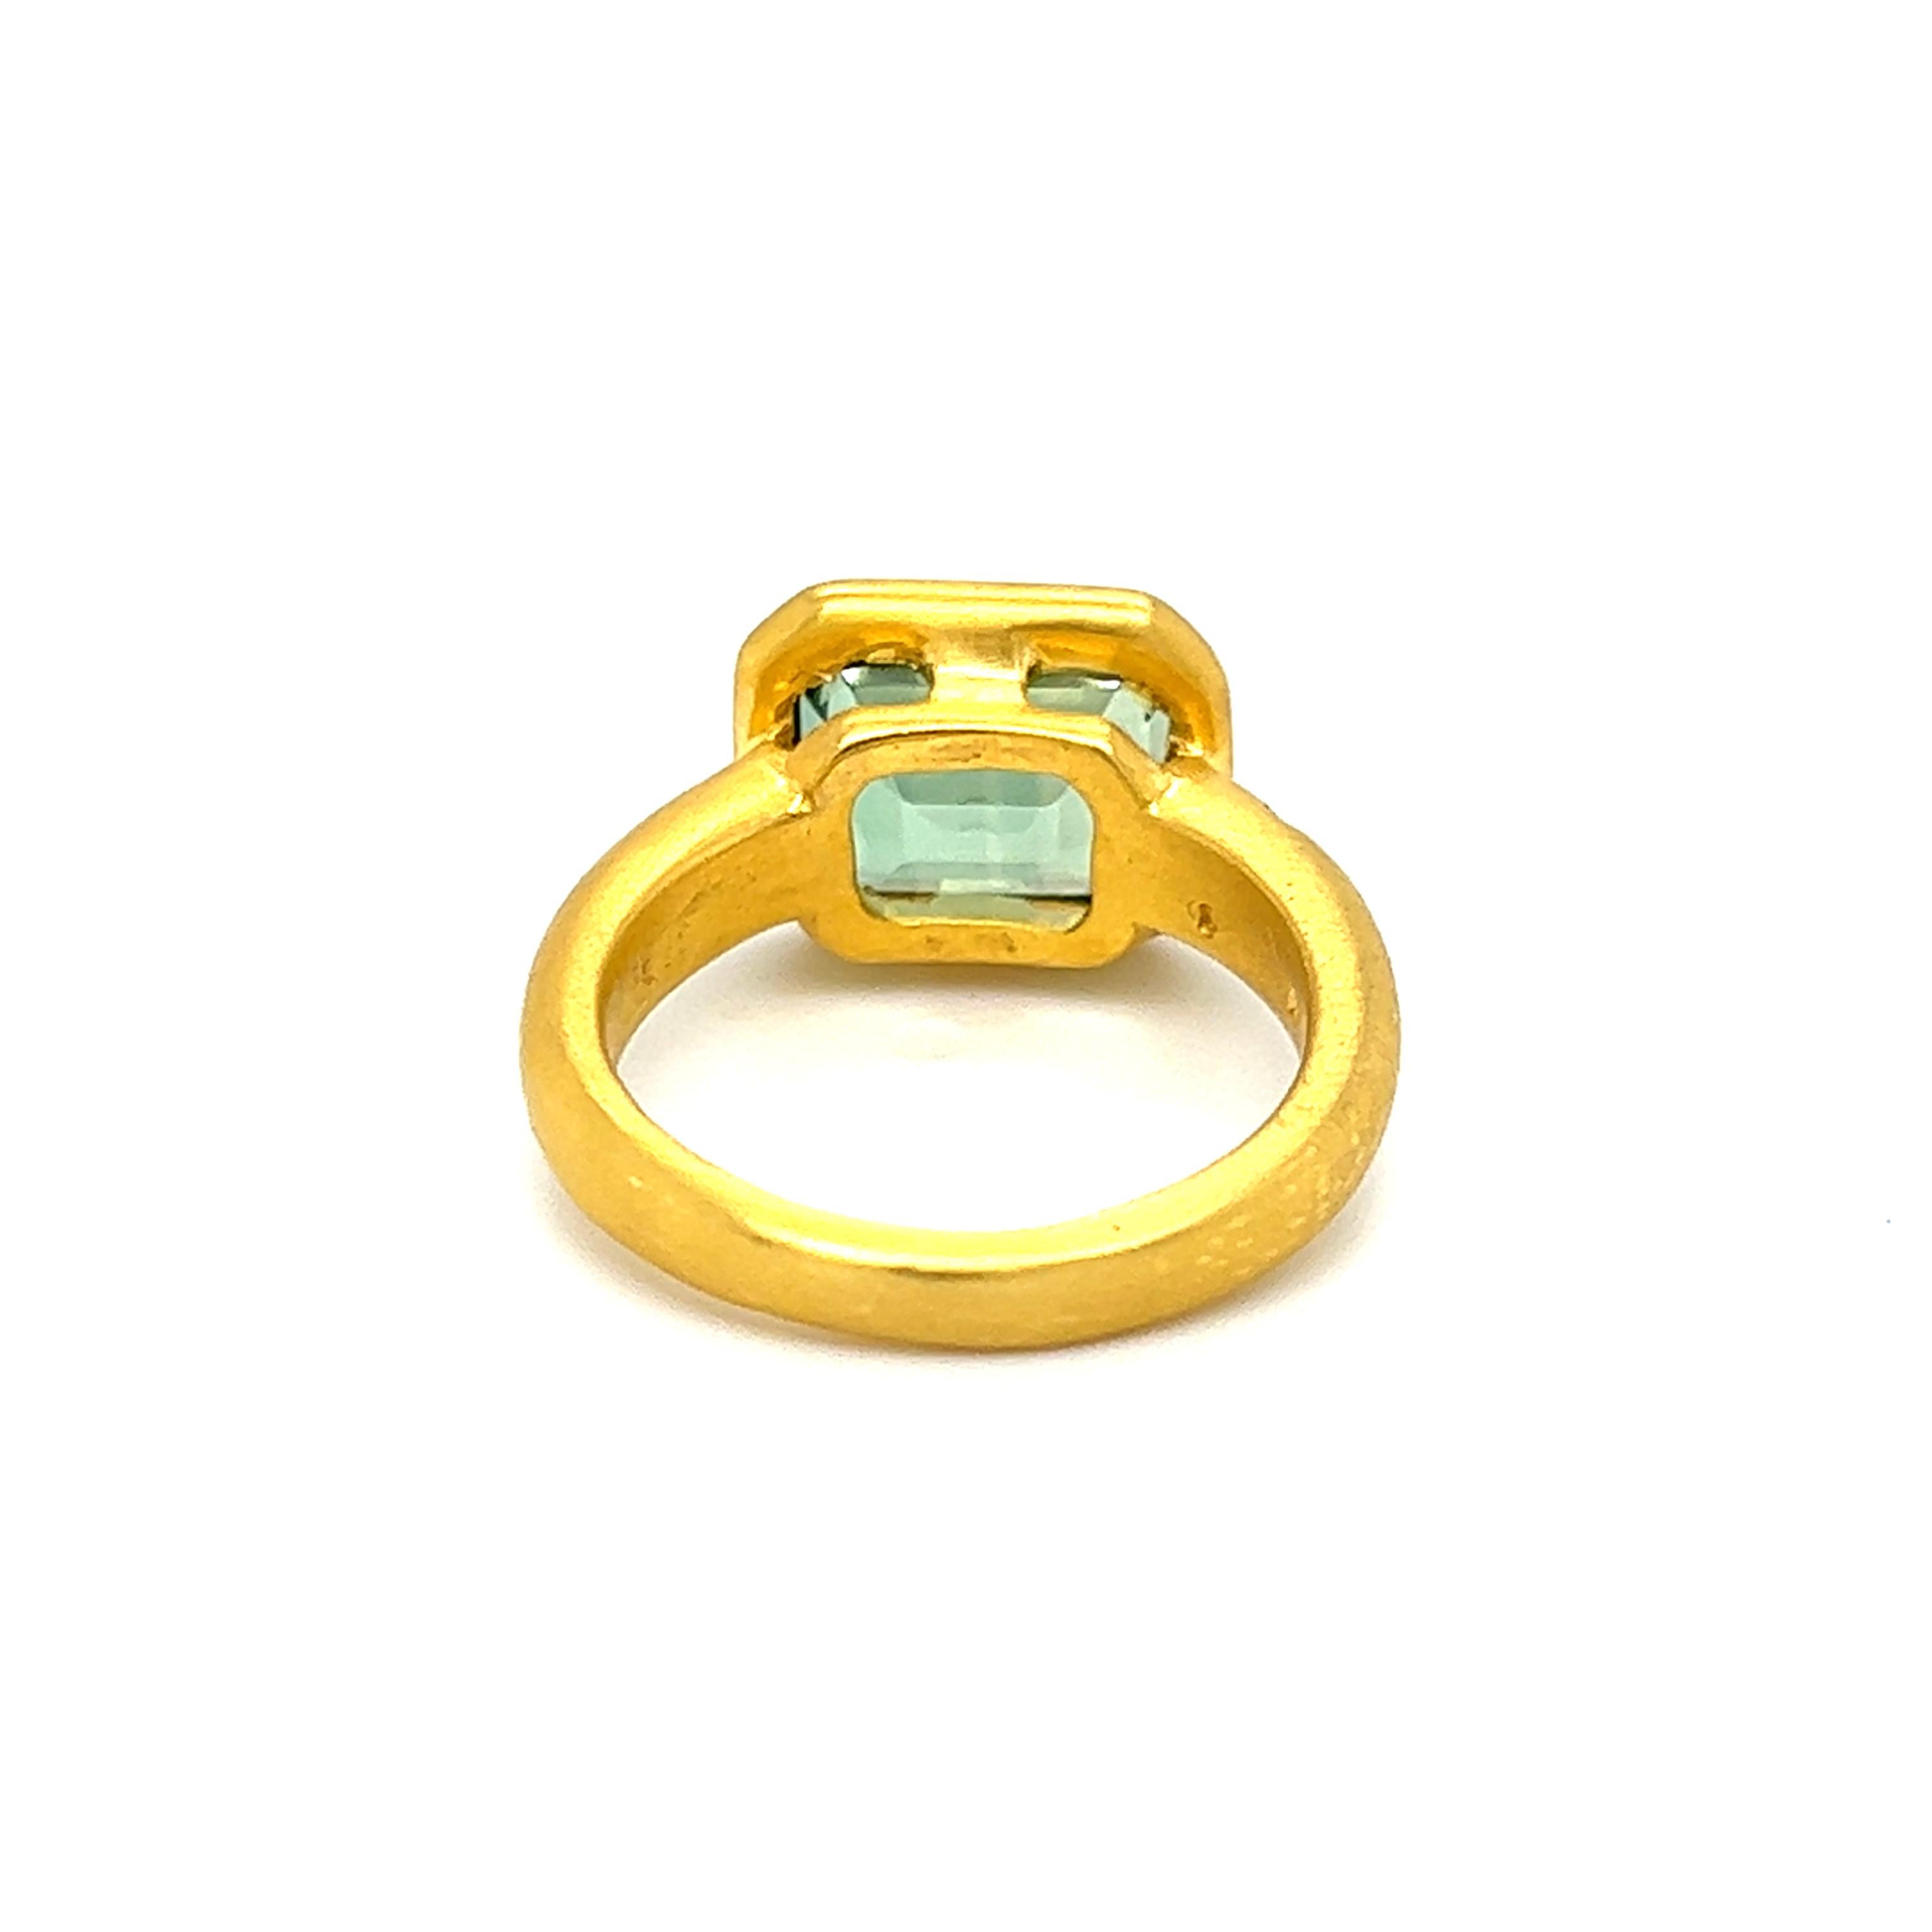 One 18-karat yellow gold brushed finished ring, designed by H. Stern, set with one 11x9mm emerald cut light green tourmaline and one round brilliant cut diamond, approximately 0.03 carat total, with H/I color and VS1 clarity.  The ring is stamped